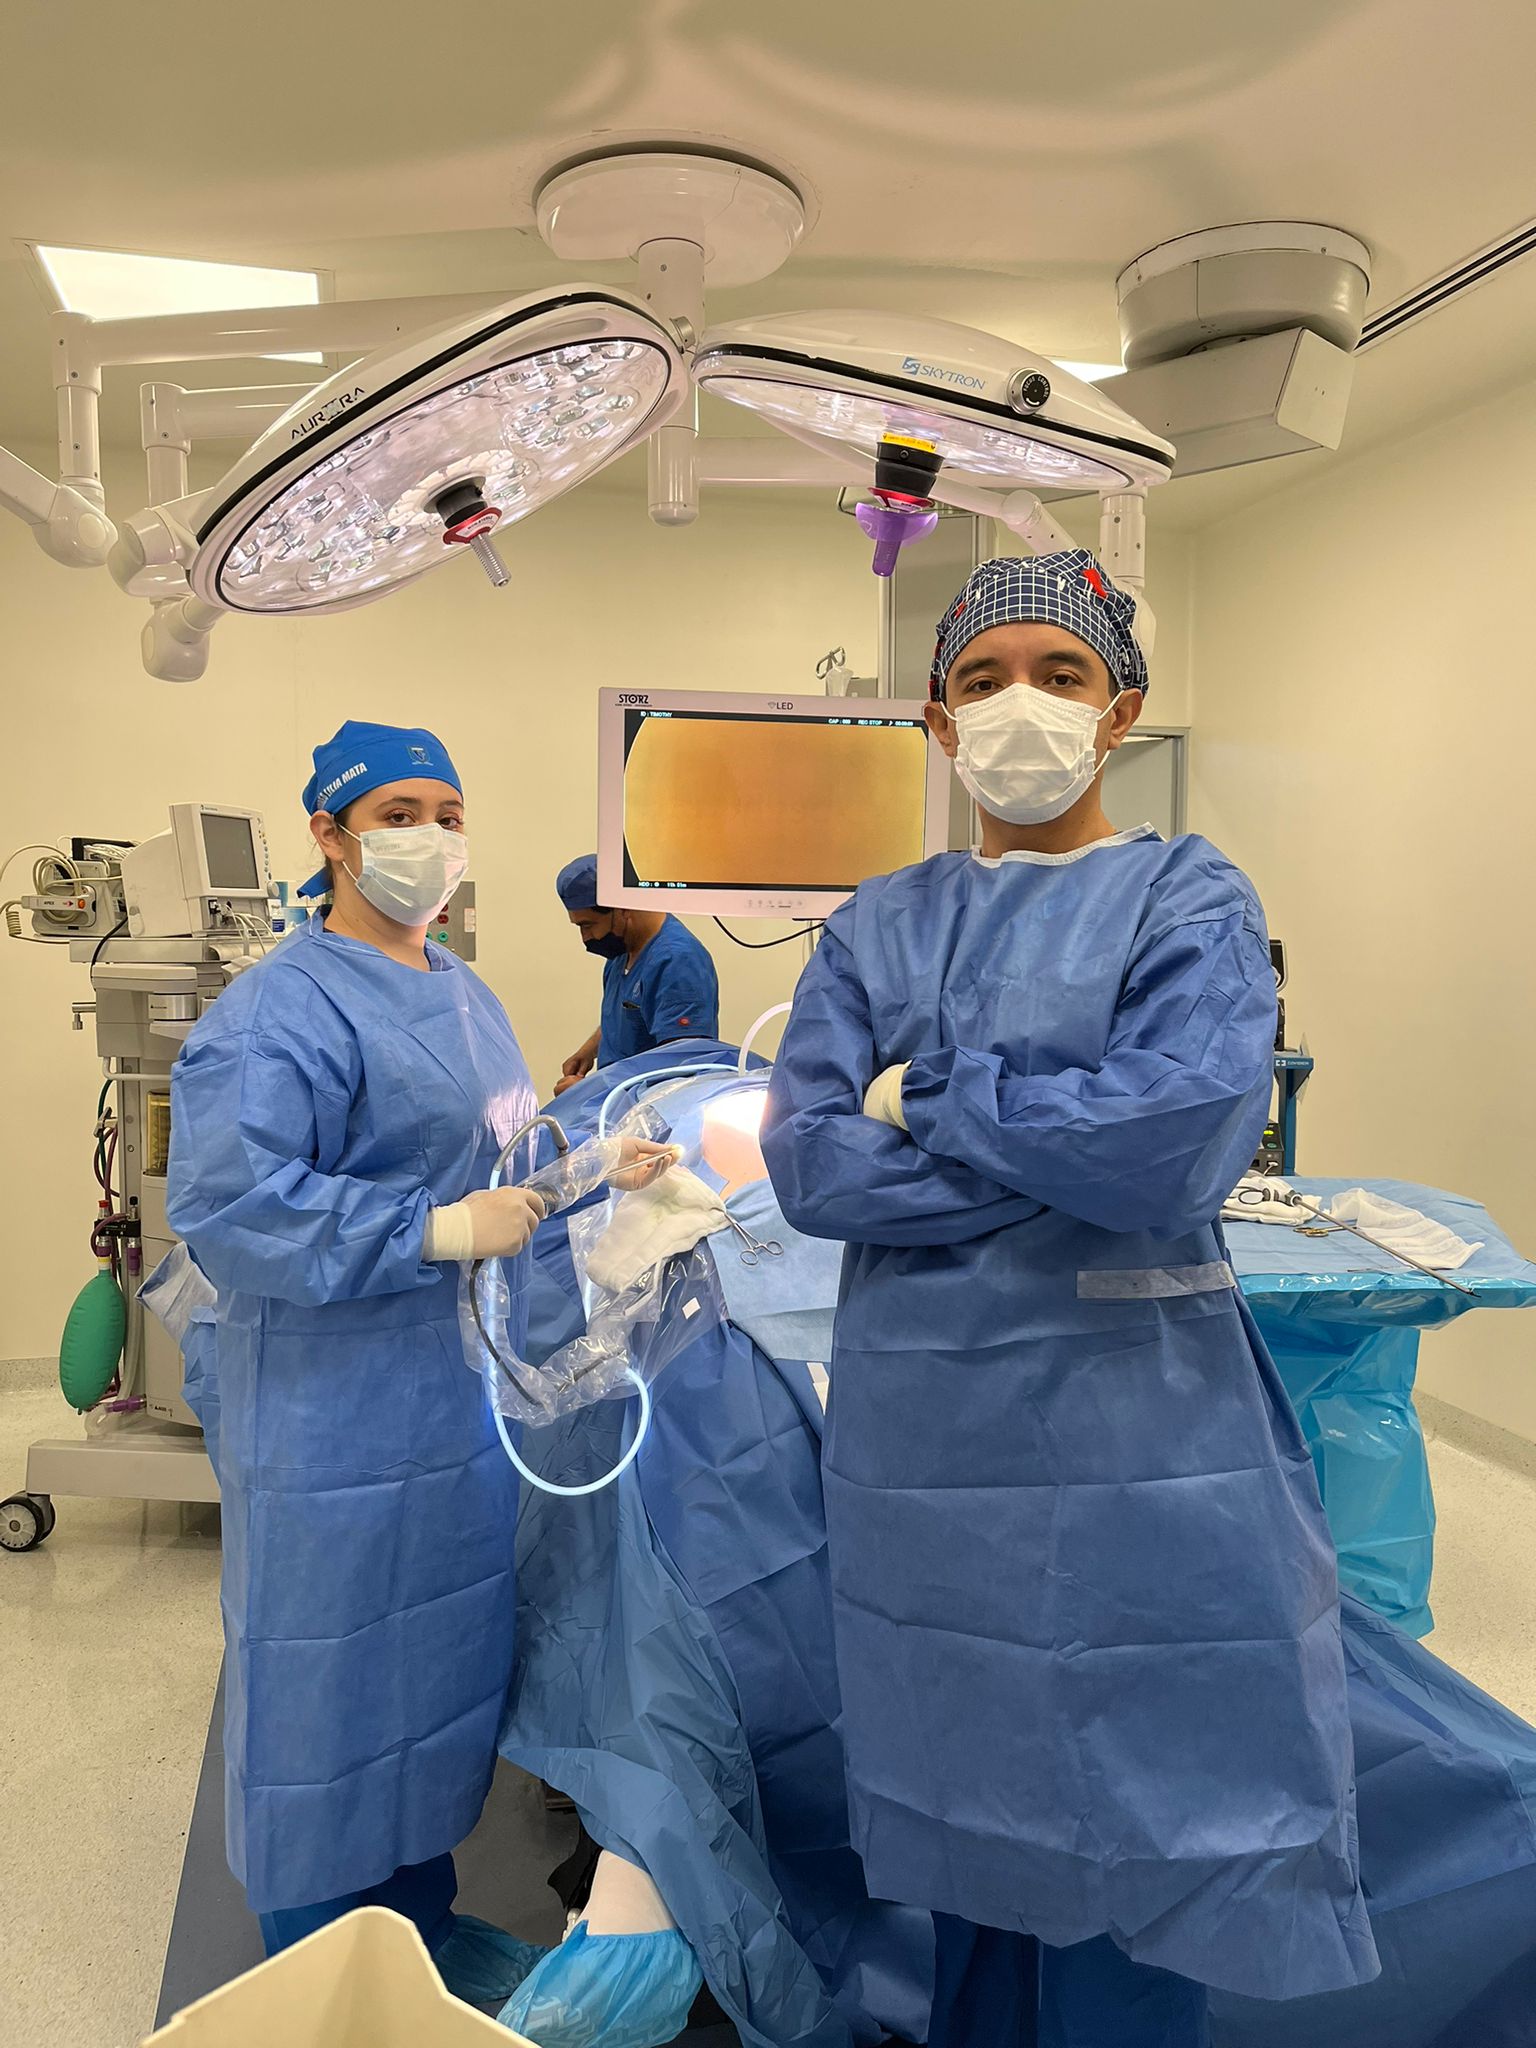 Gastric bypass surgery, a type of metabolic surgery, involves creating a small pouch from the stomach and connecting it directly to the small intestine.